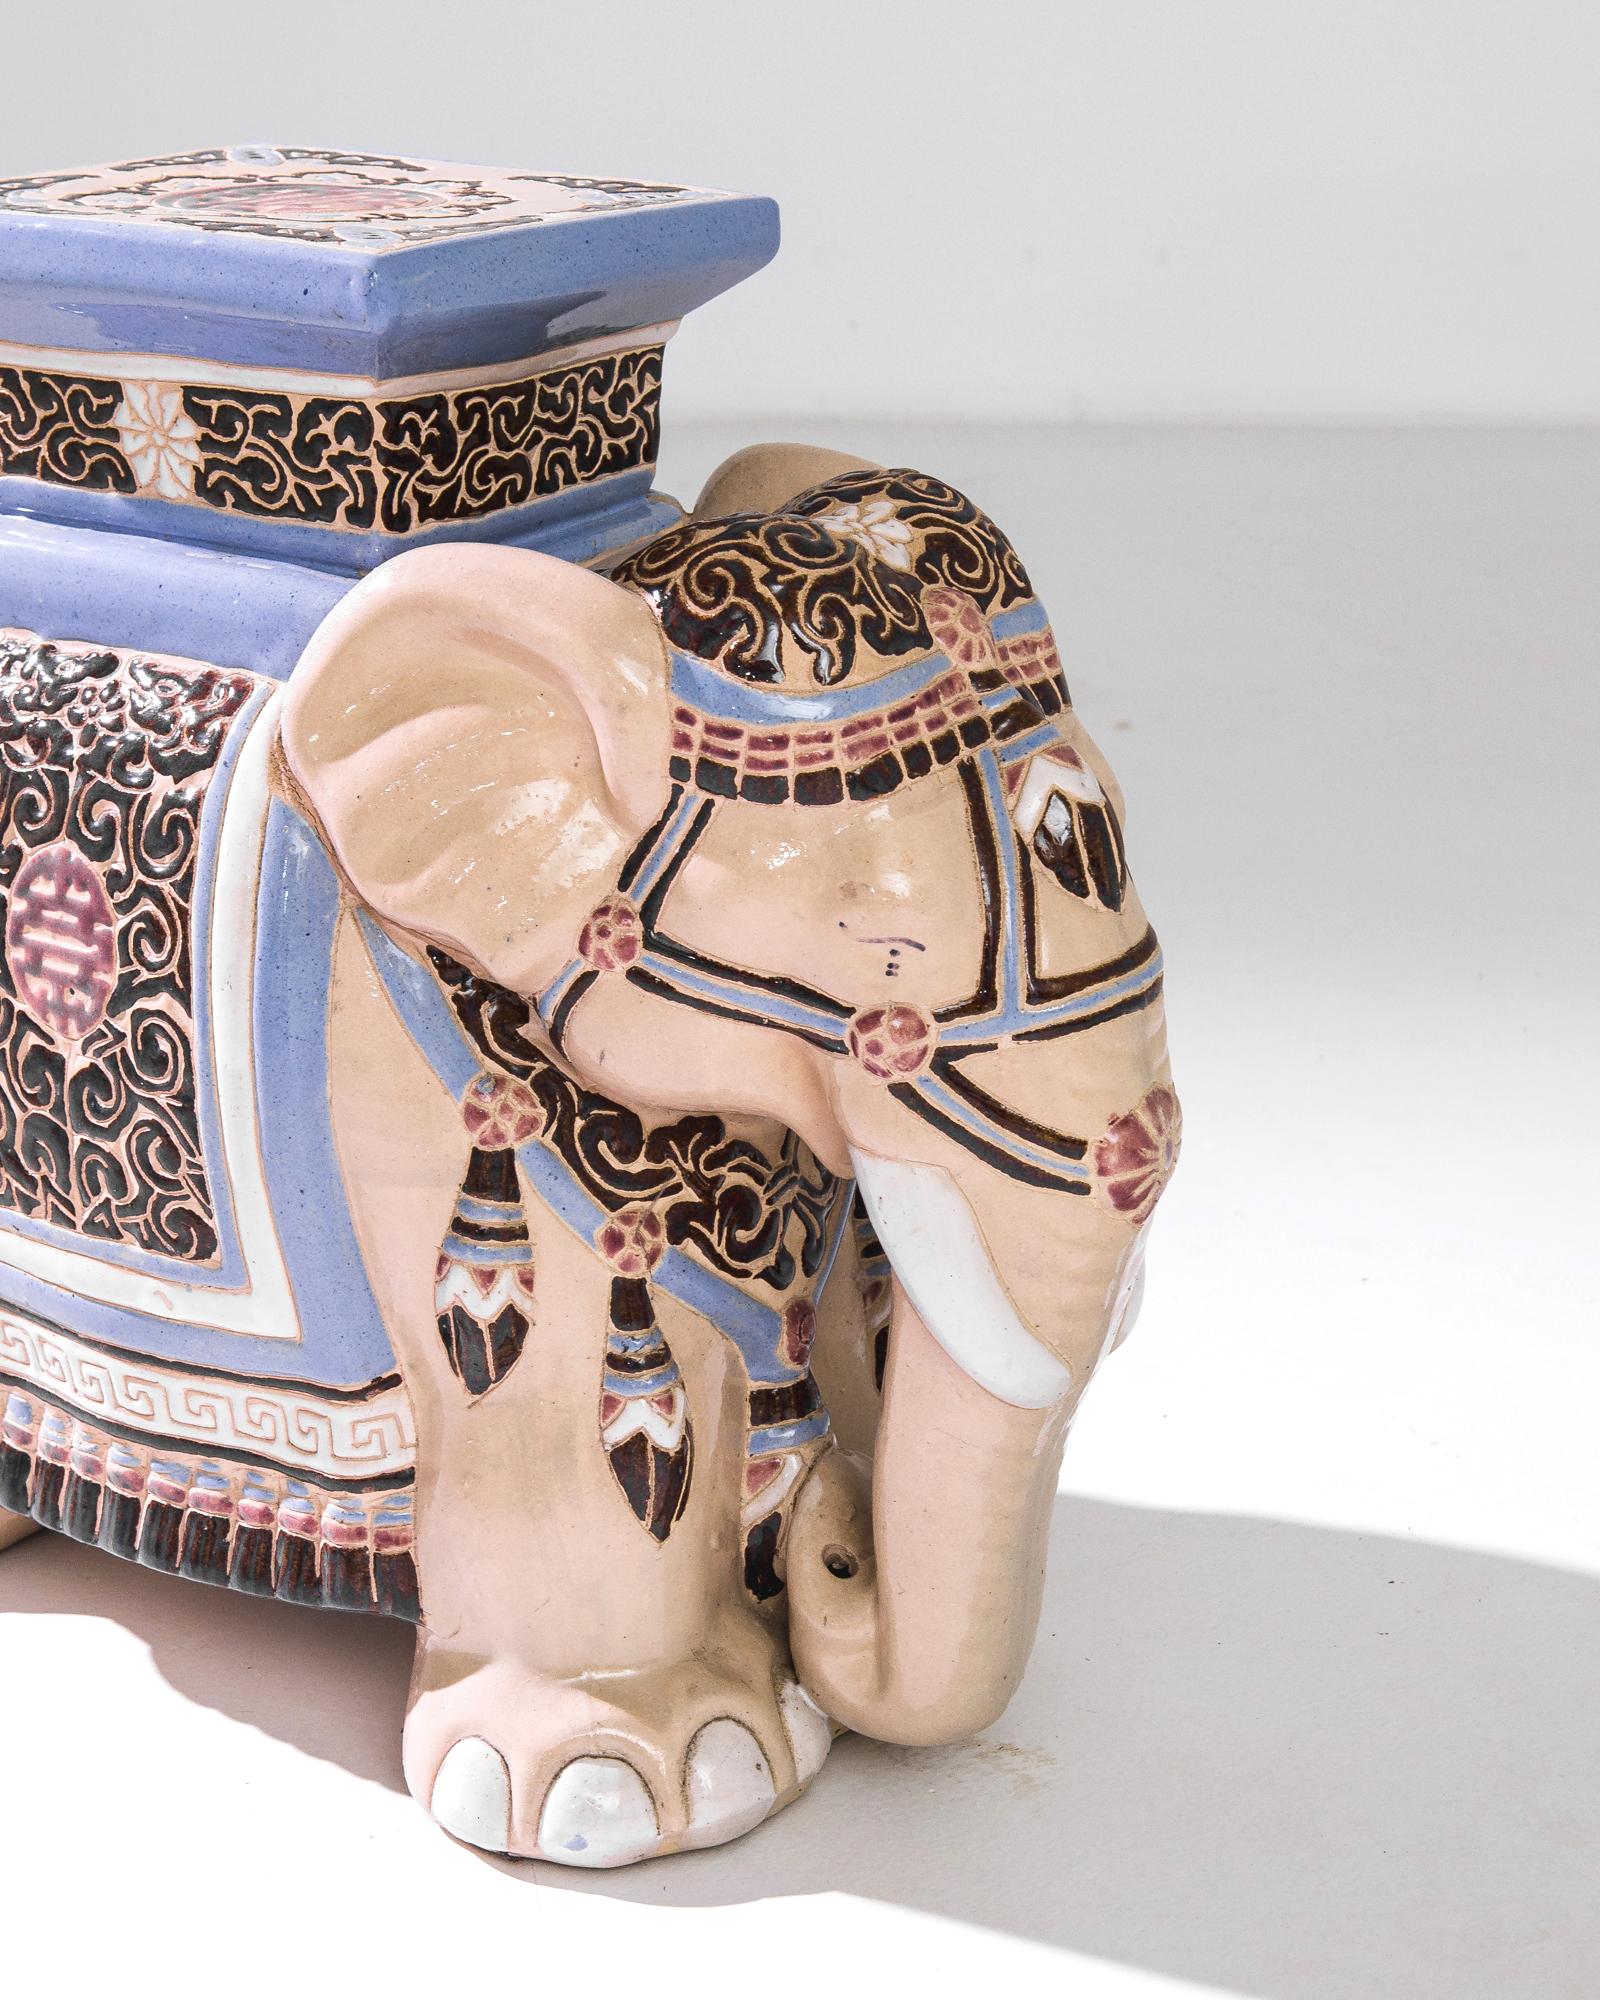 A ceramic decoration from 1960s France in the shape of an elephant. A saddle seat and blanket are glazed with creamy white and powder blue; the assortment of delicate patterns — reflecting Chinese and Arabic influences — suggest the romance of the